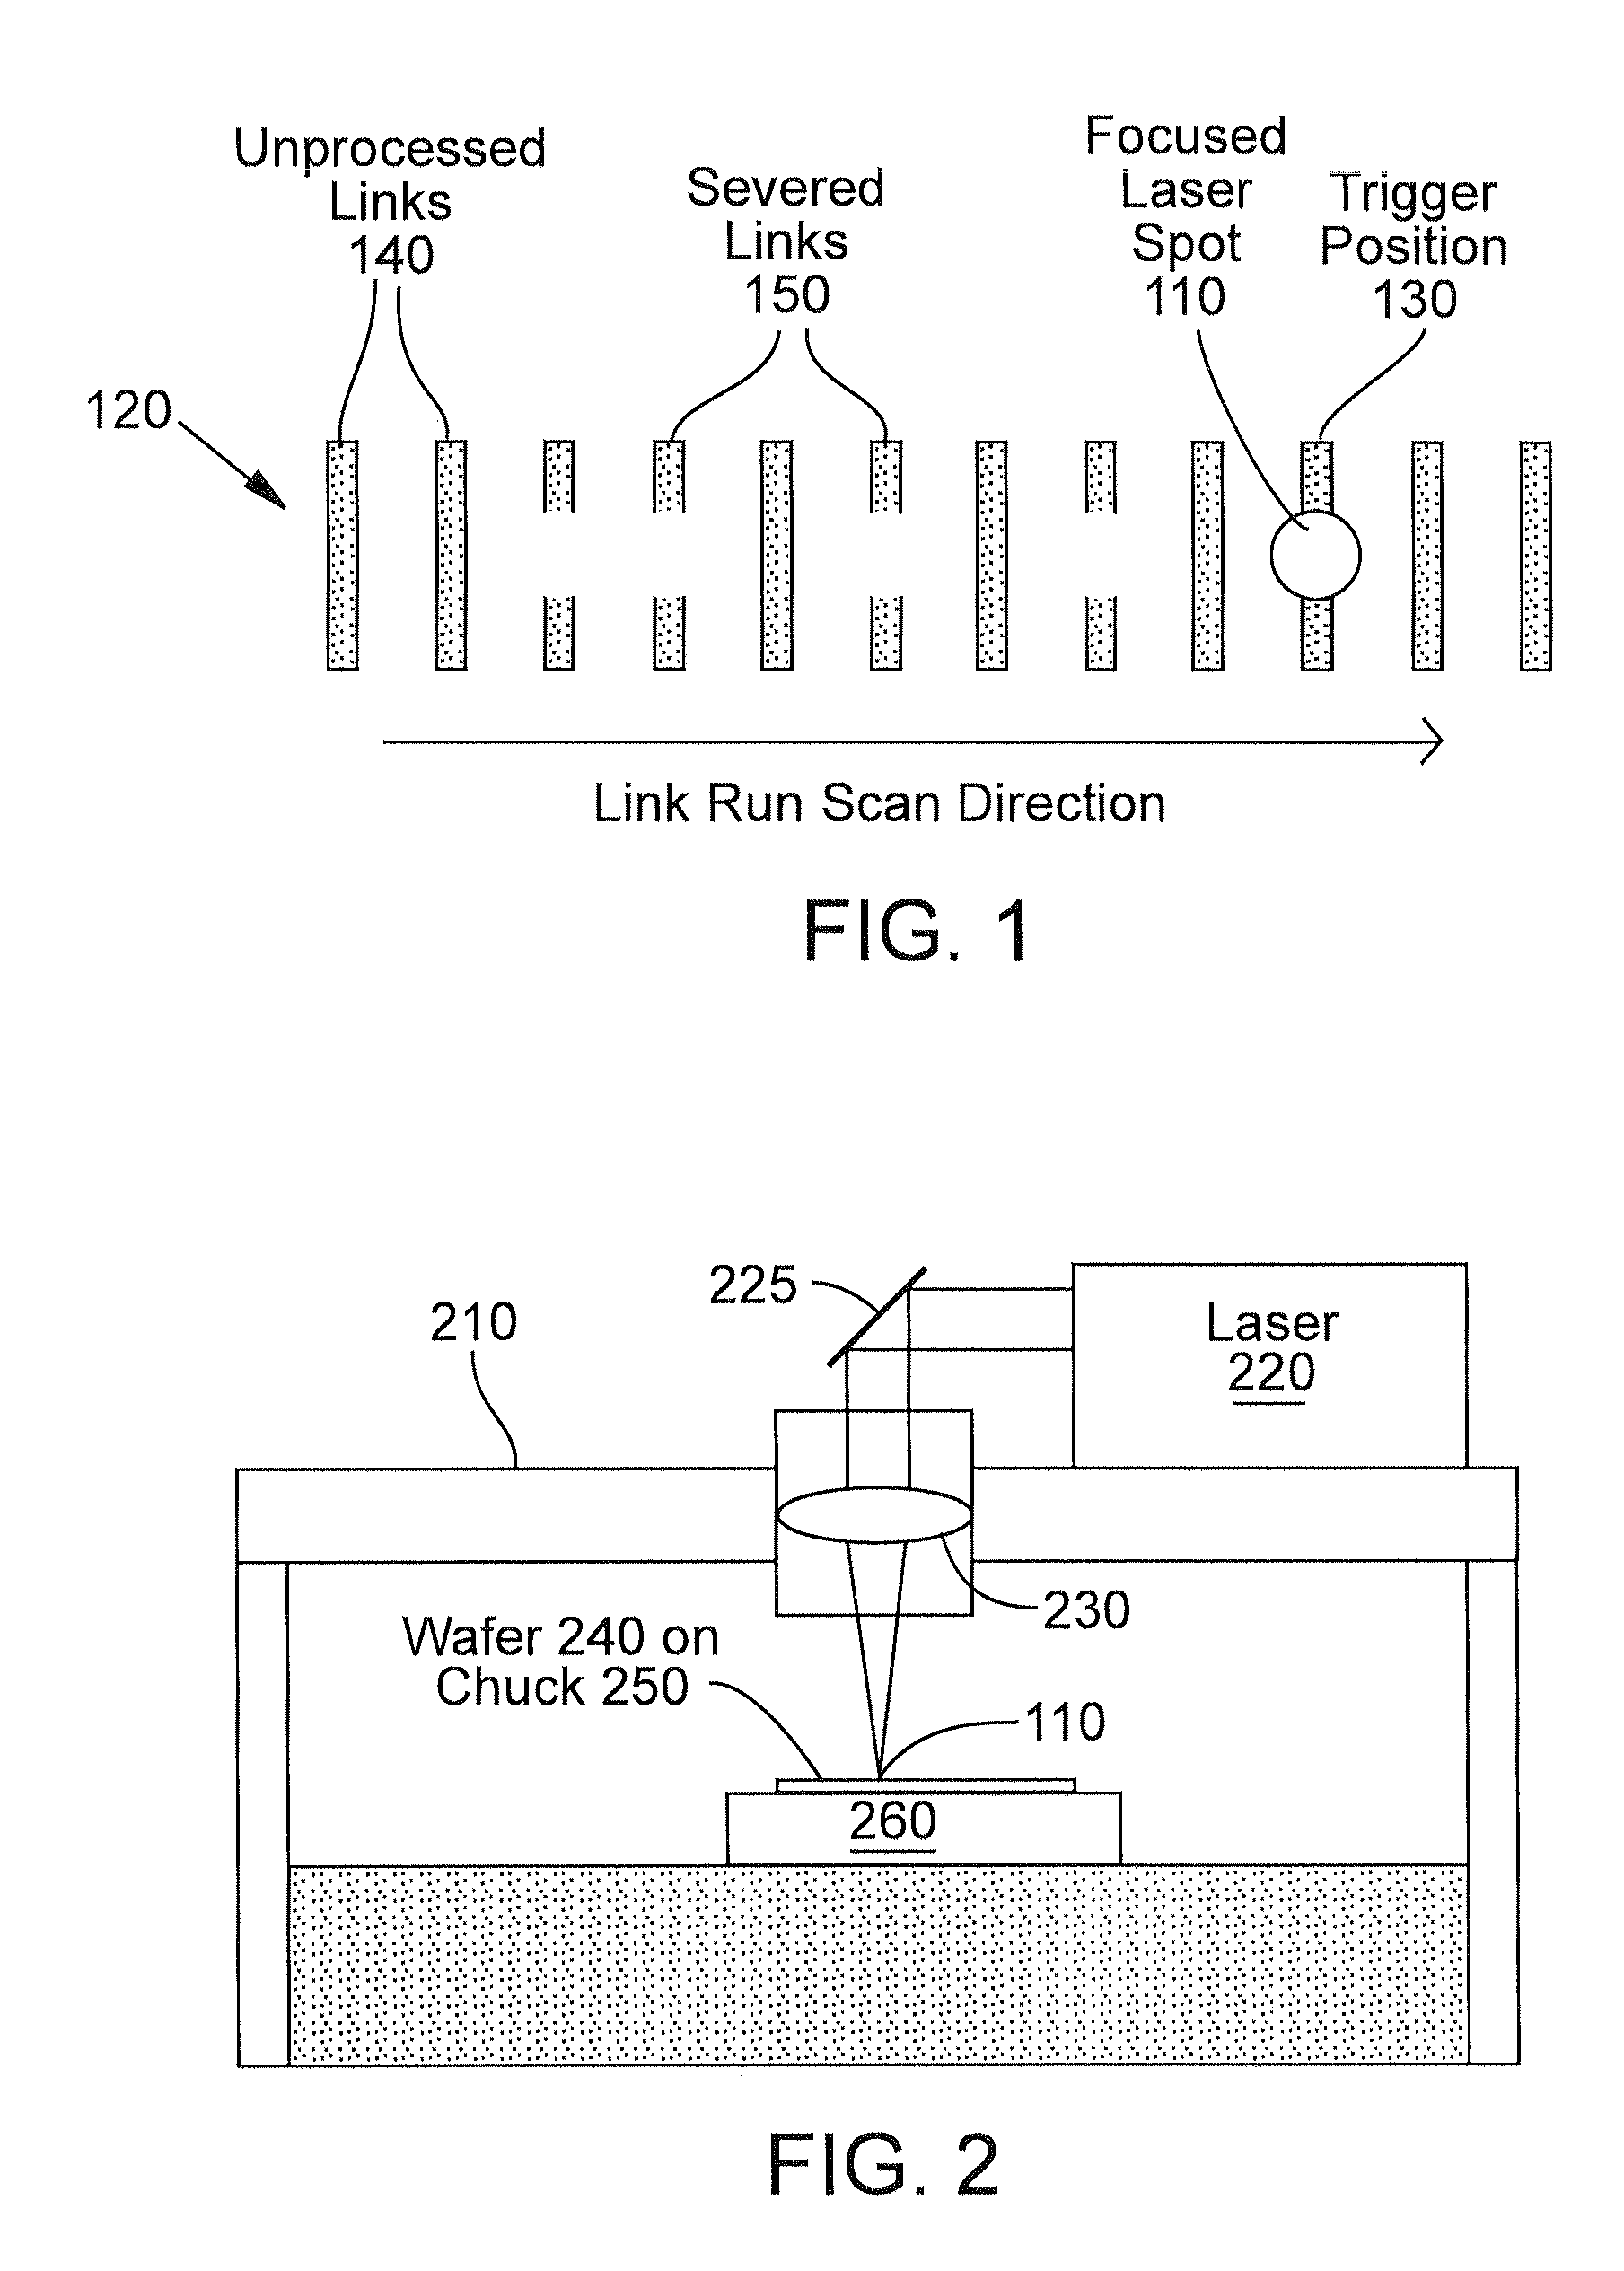 Reconfigurable semiconductor structure processing using multiple laser beam spots